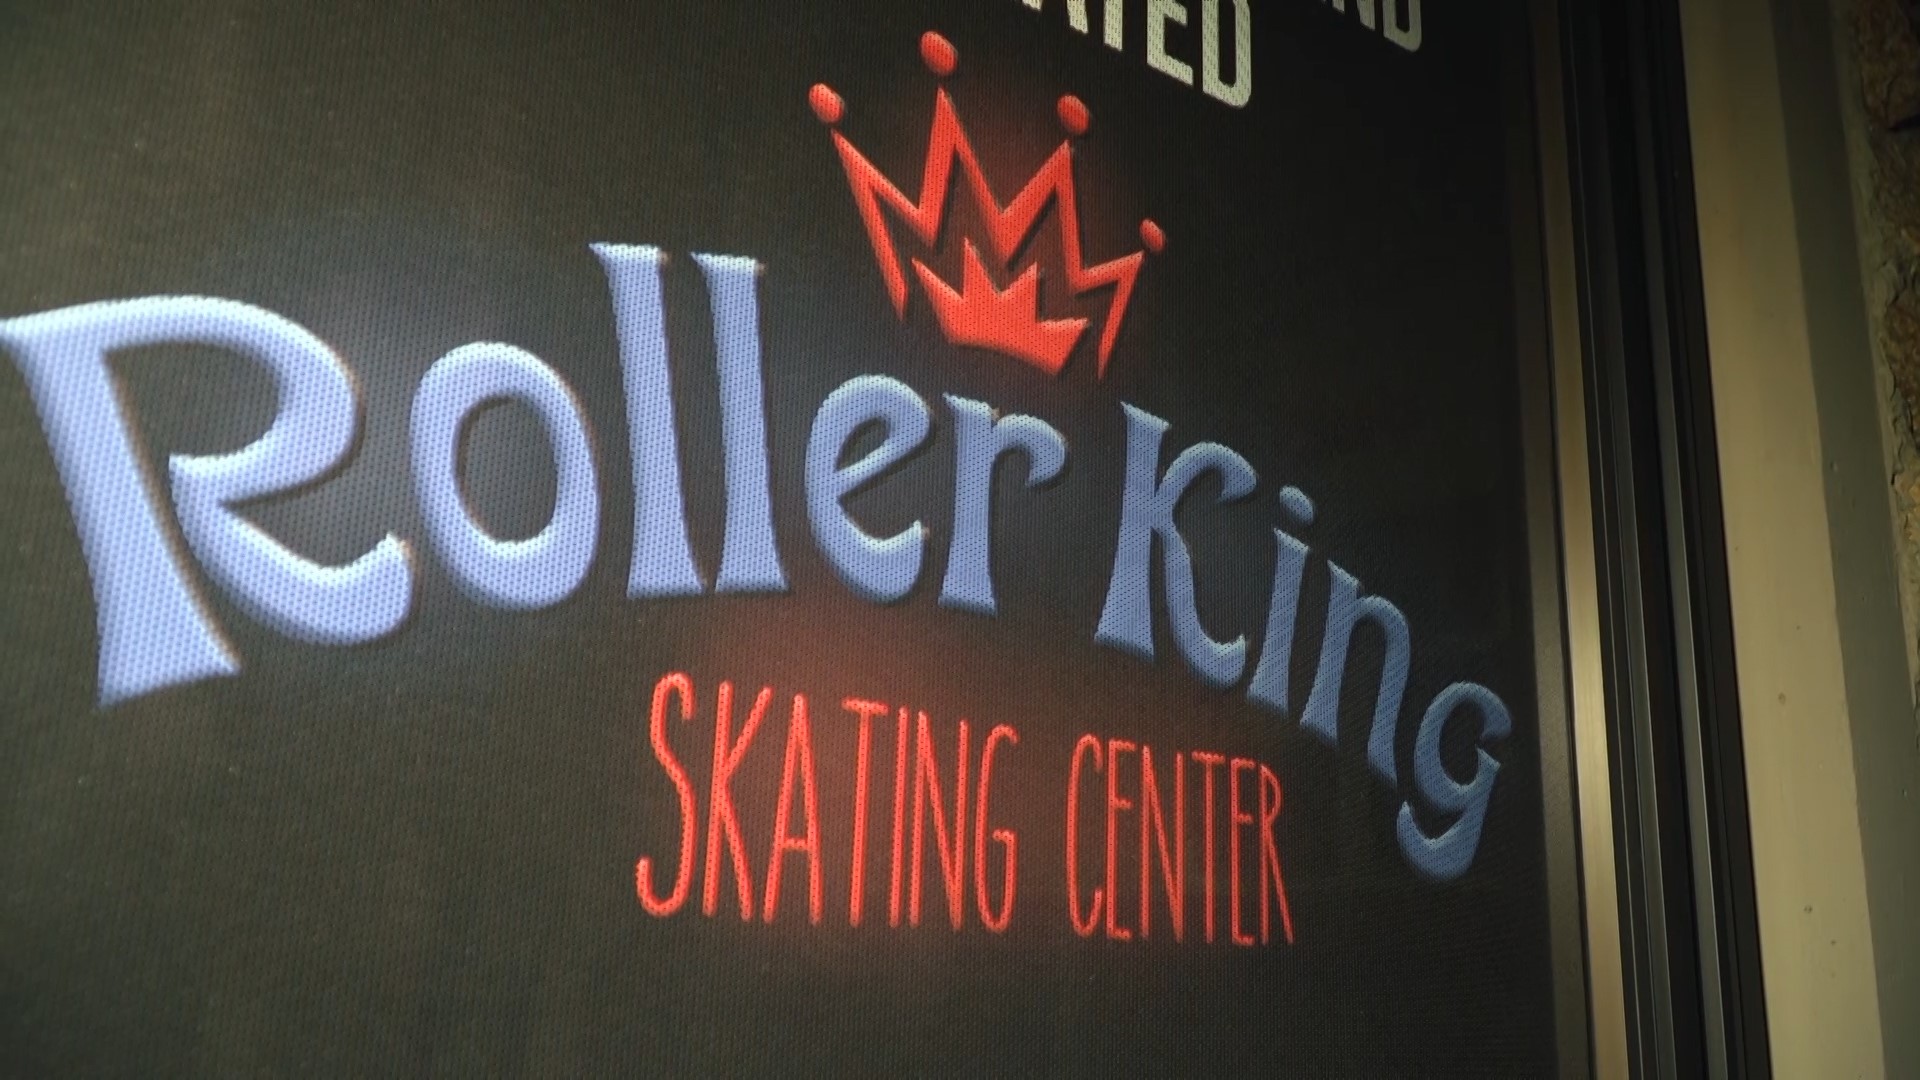 Roller rink owners say they have waited months for guidance from the state but don't fall into any of the business categories for reopening.